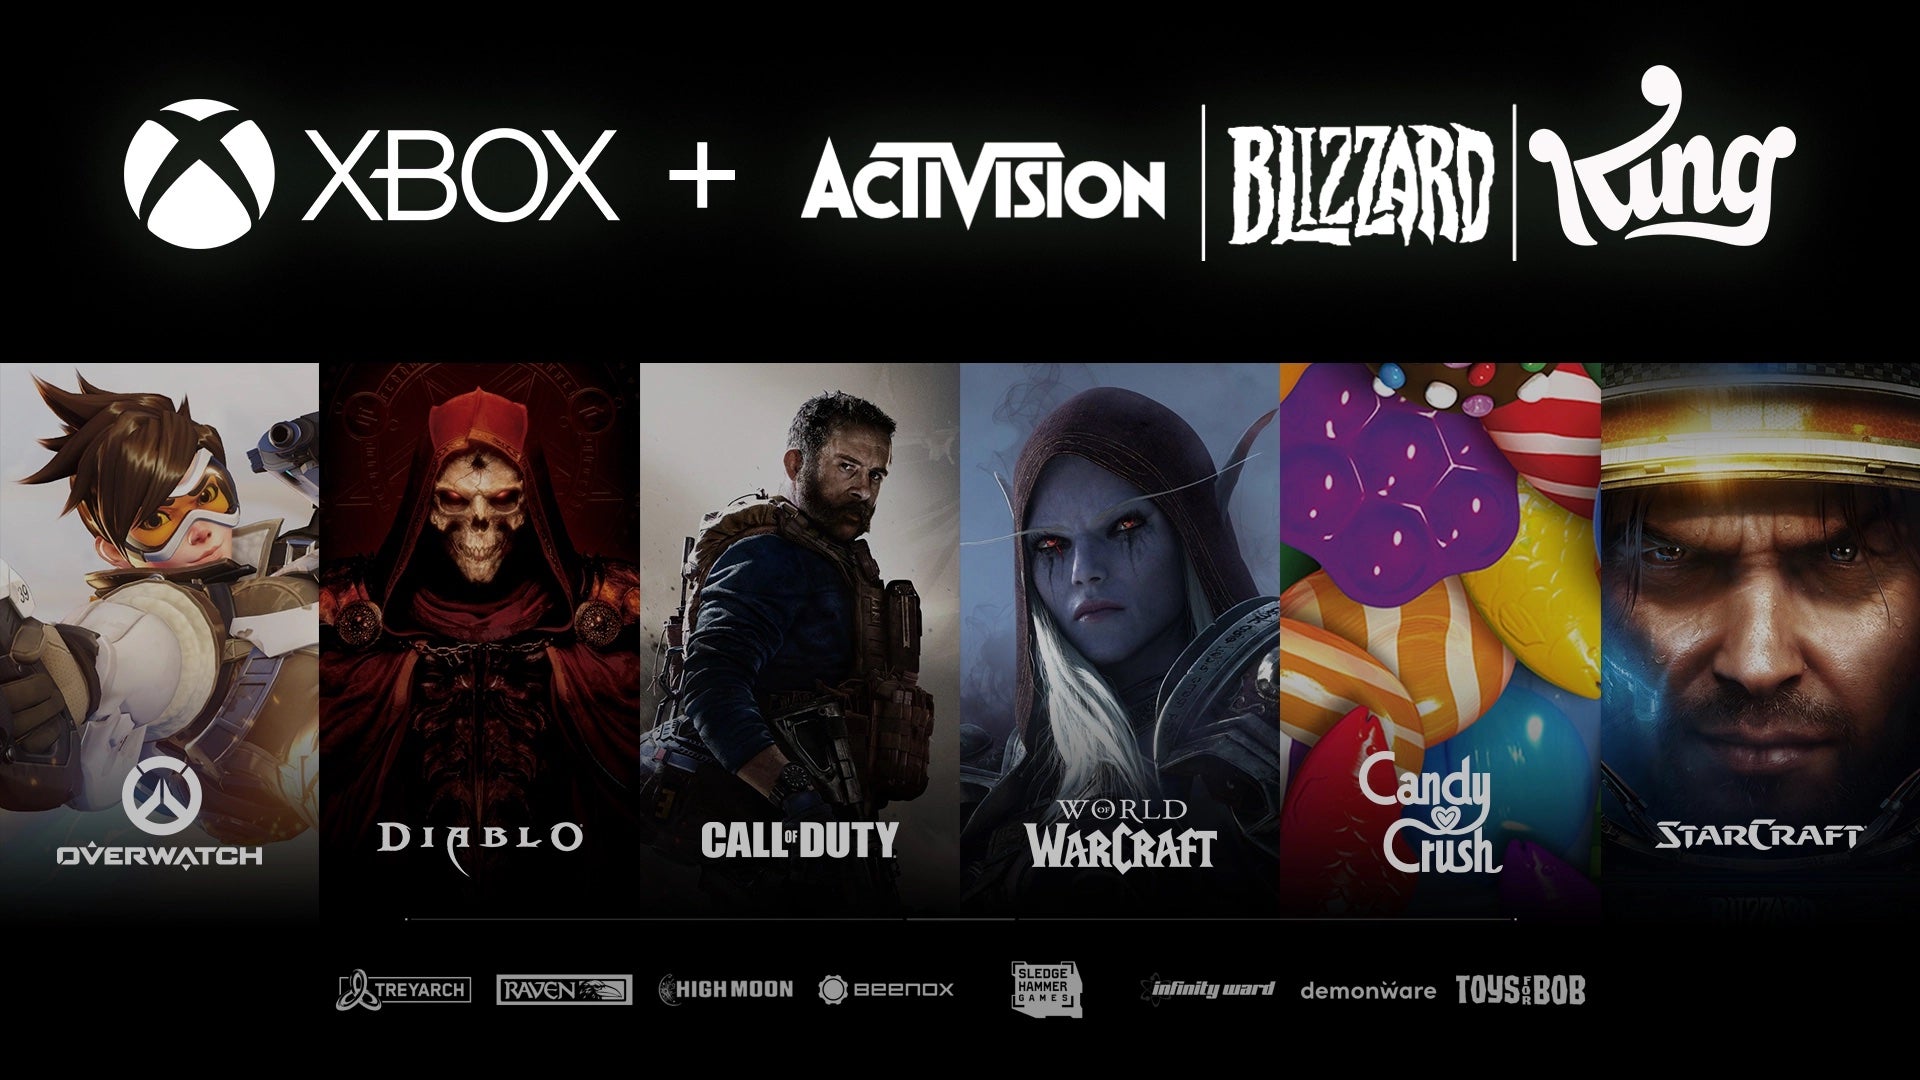 Image for "Will Sony buy Ubisoft?" and other questions after Xbox’s shock acquisition of Activision Blizzard